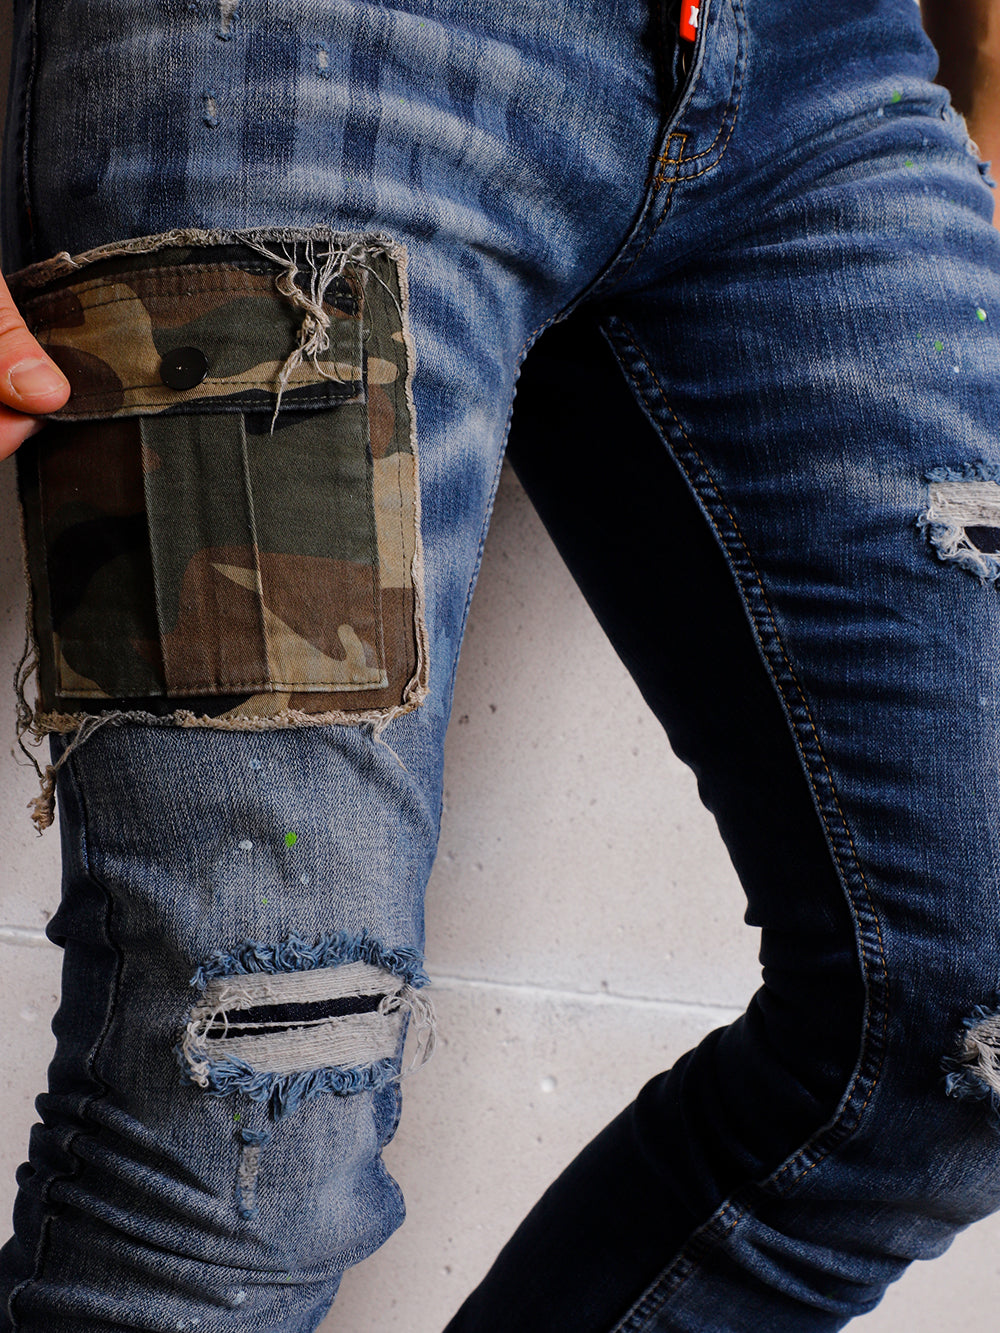 A man wearing ripped jeans with a BLUE CAMOUFLAGE pocket.